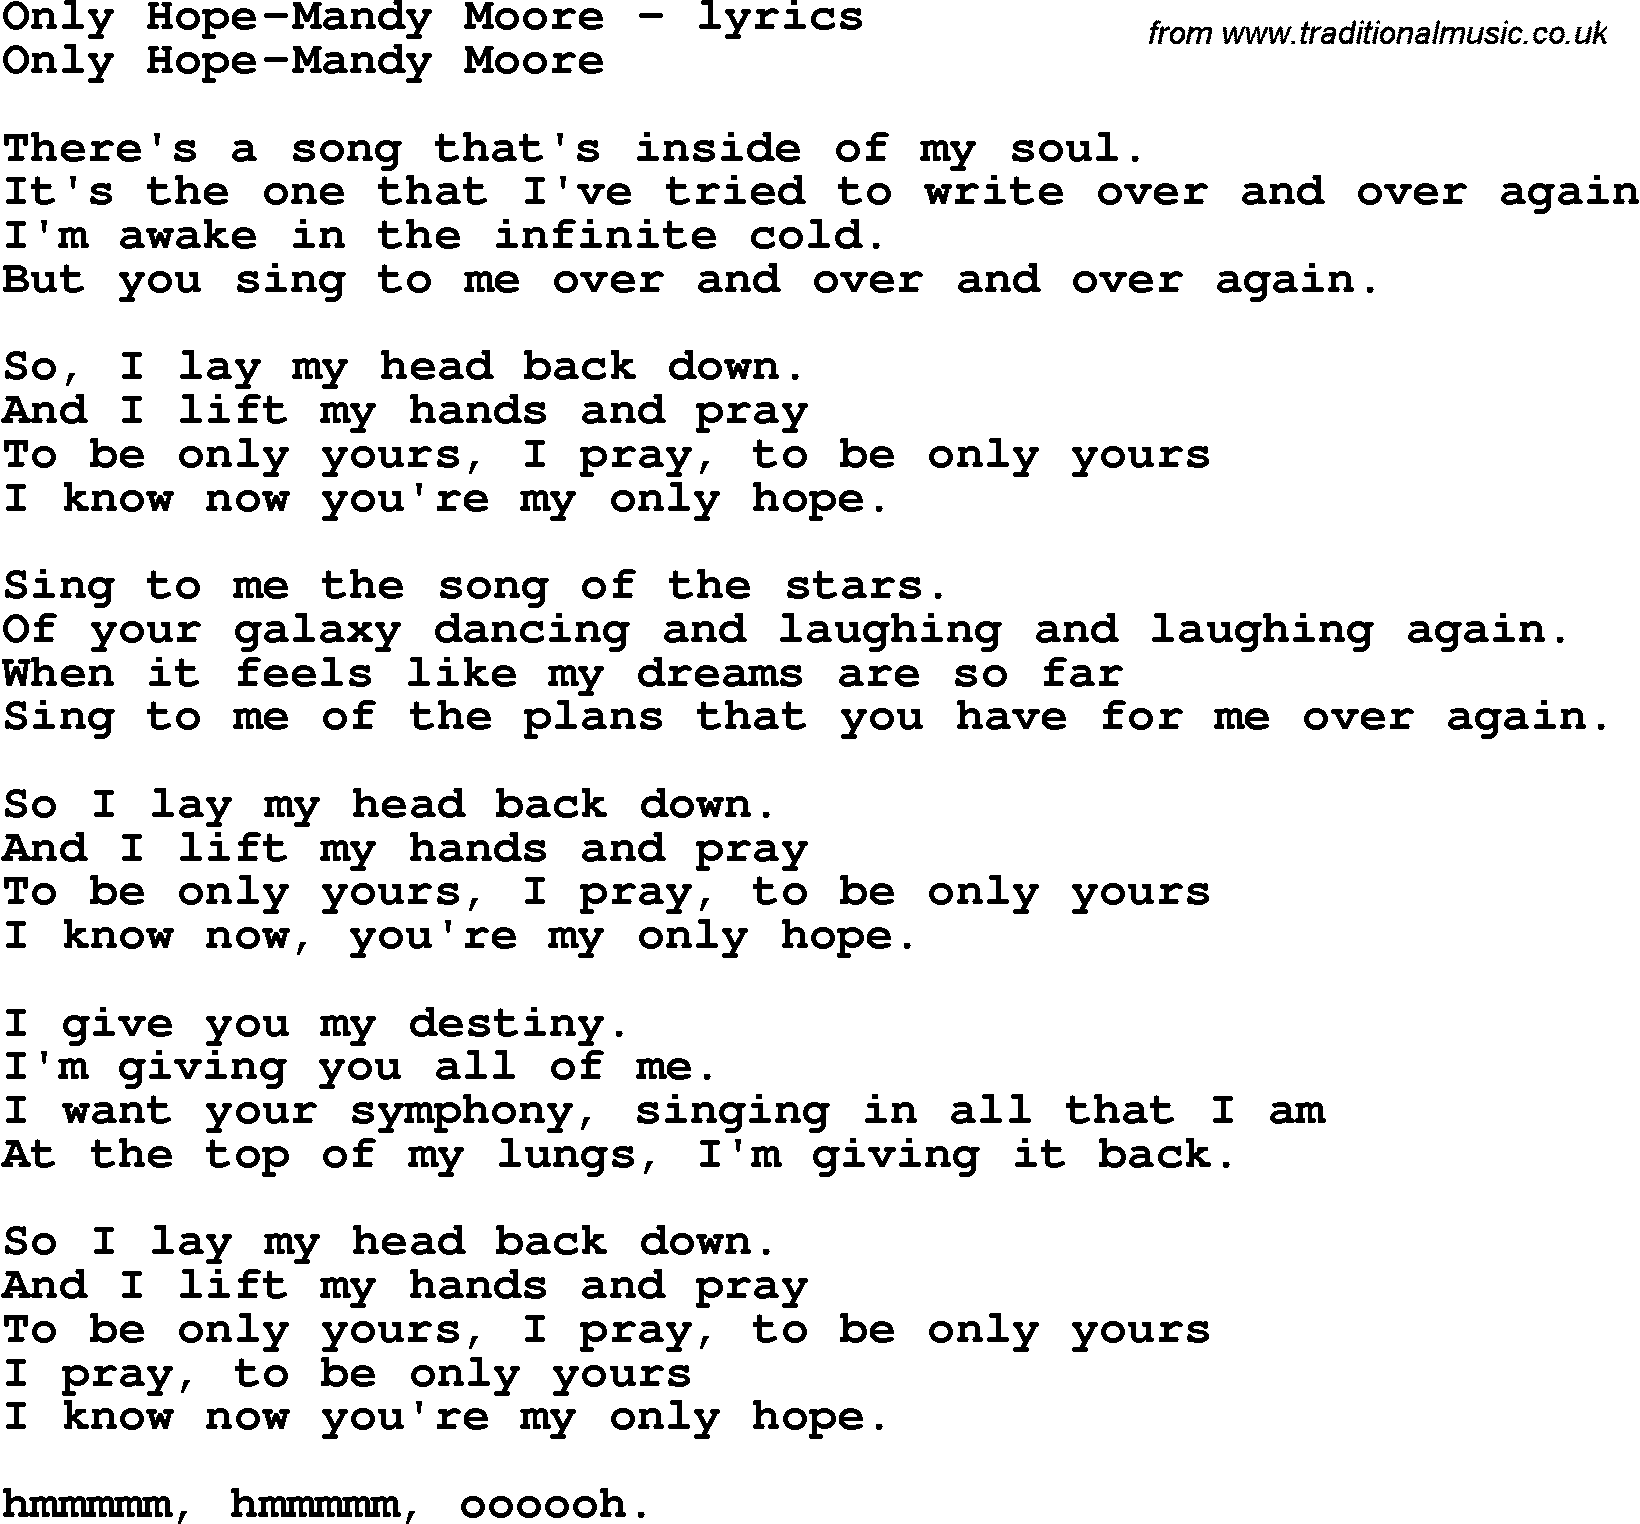 Love Song Lyrics for: Only Hope-Mandy Moore